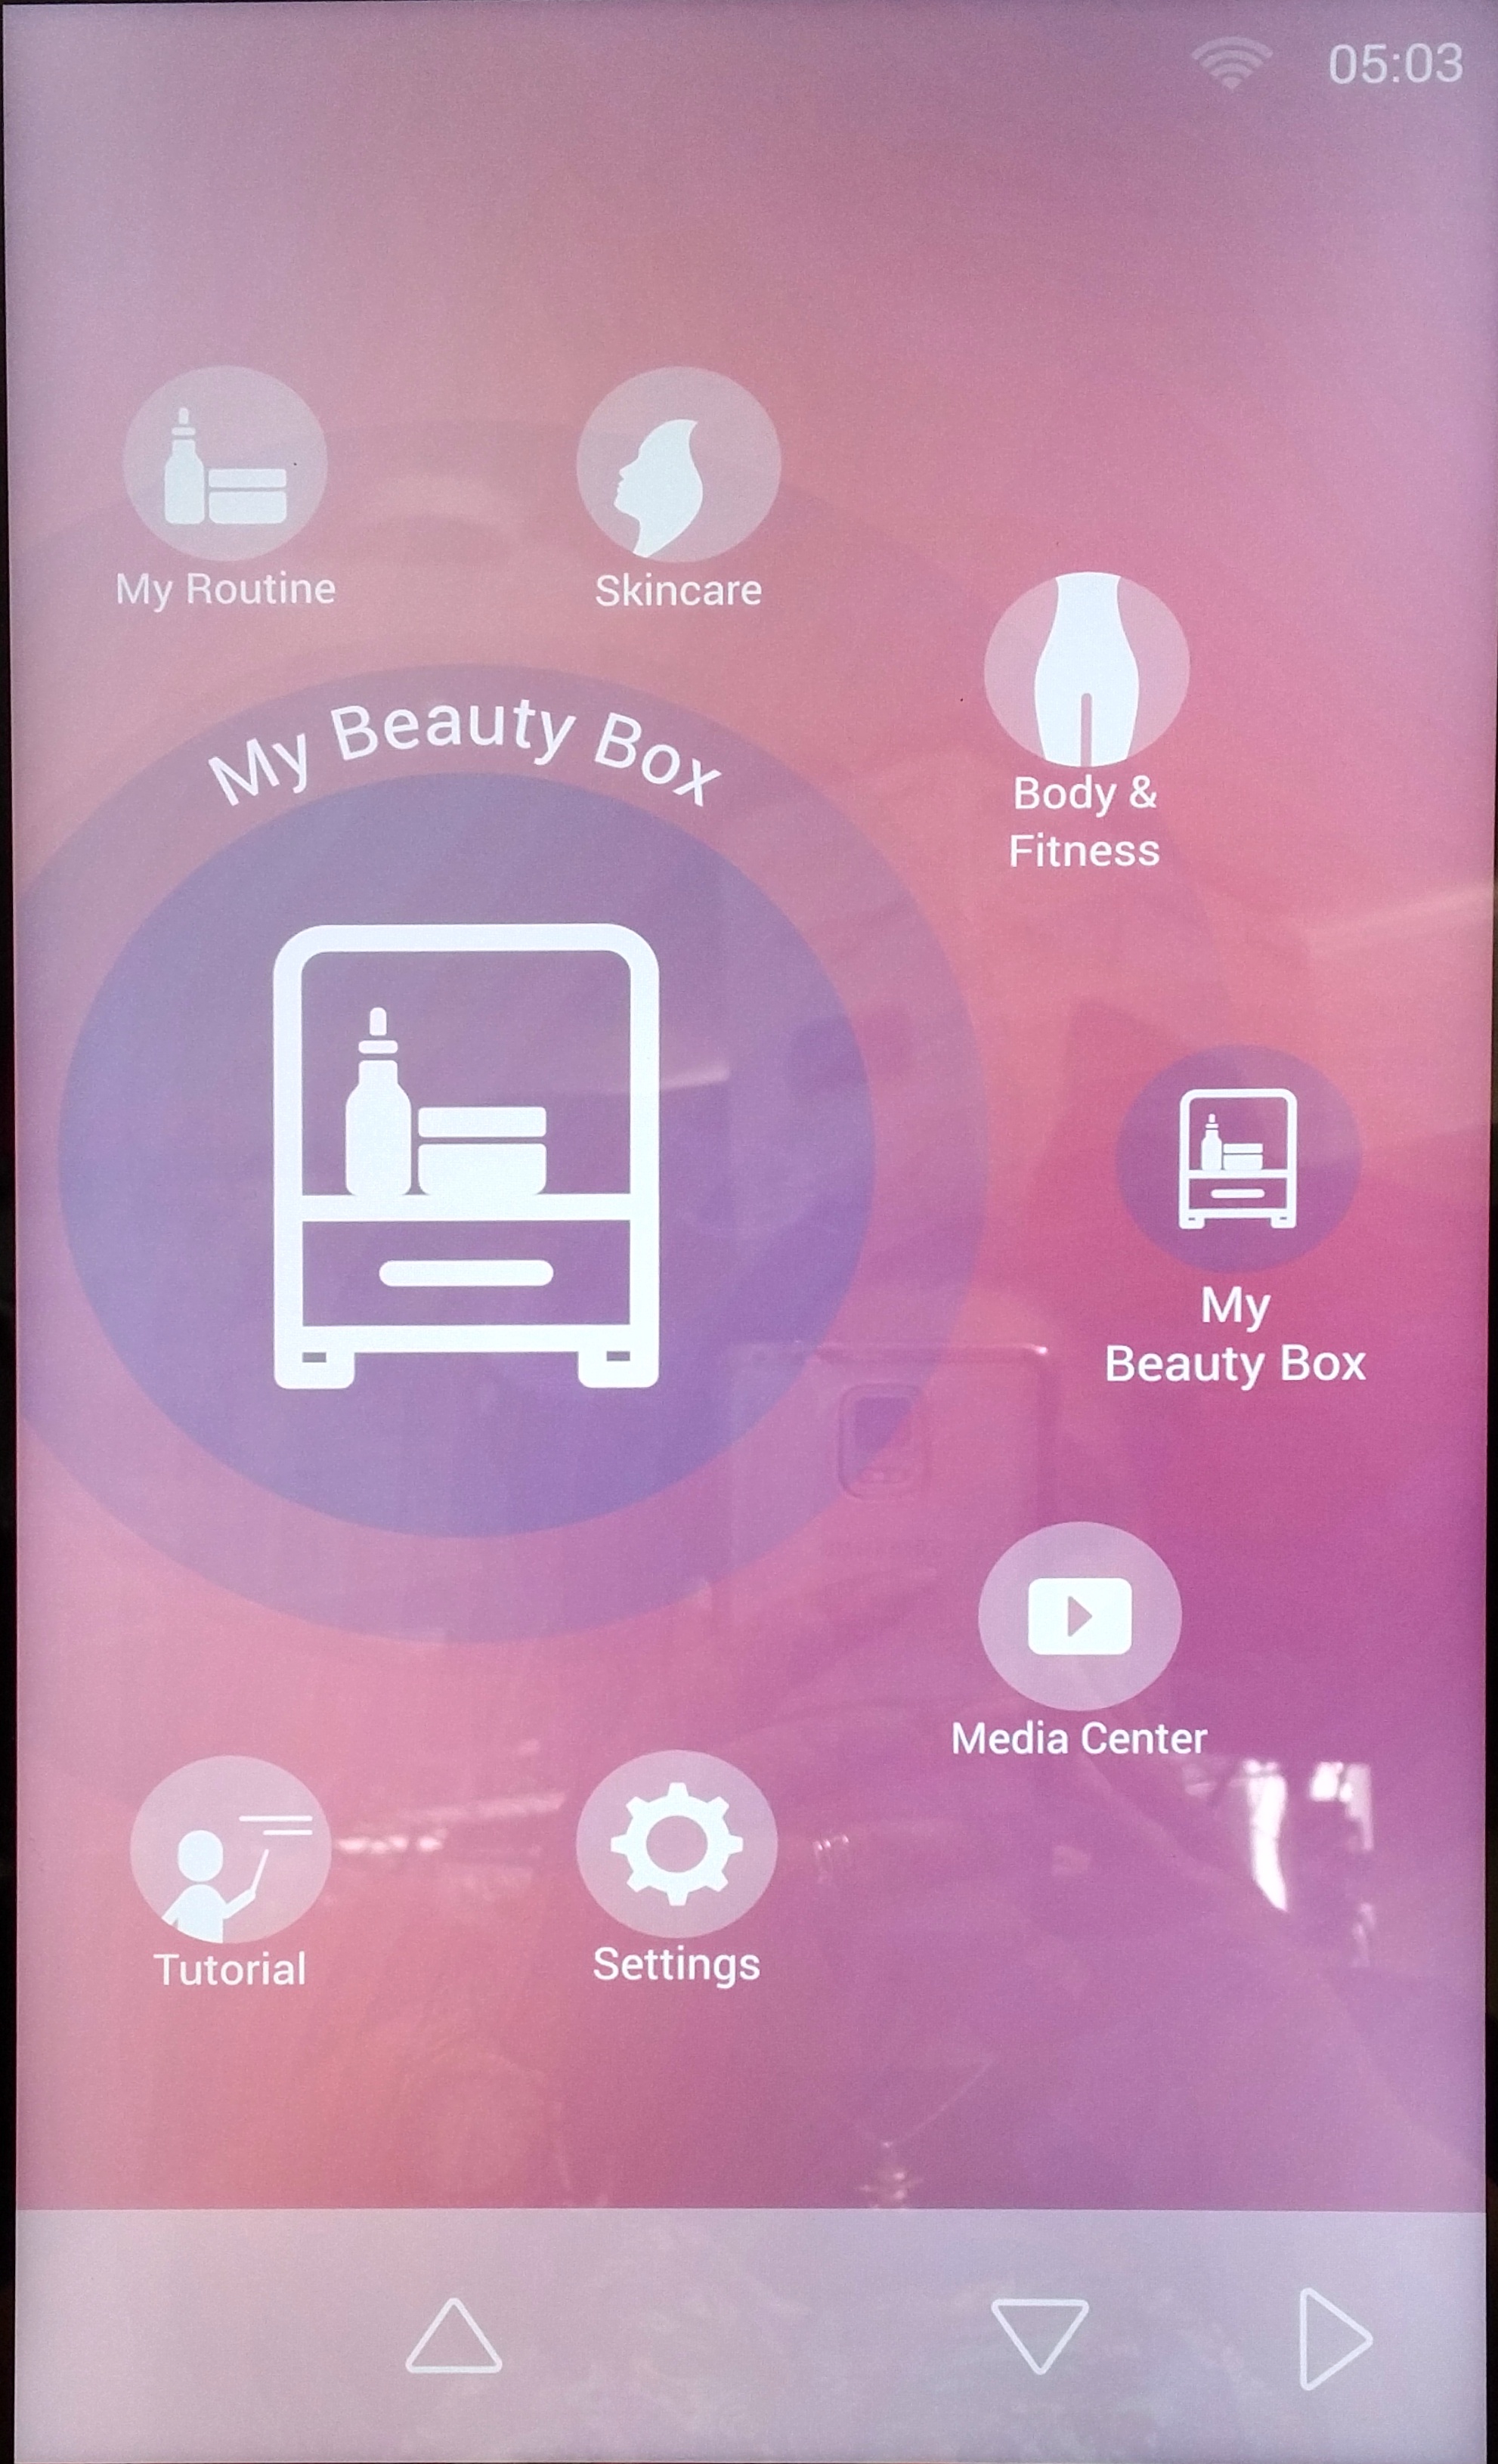 himirror, technology, beauty, mirror, skin analyzer, skin technology, technology, skin care, beauty tech, tech, review, demo,